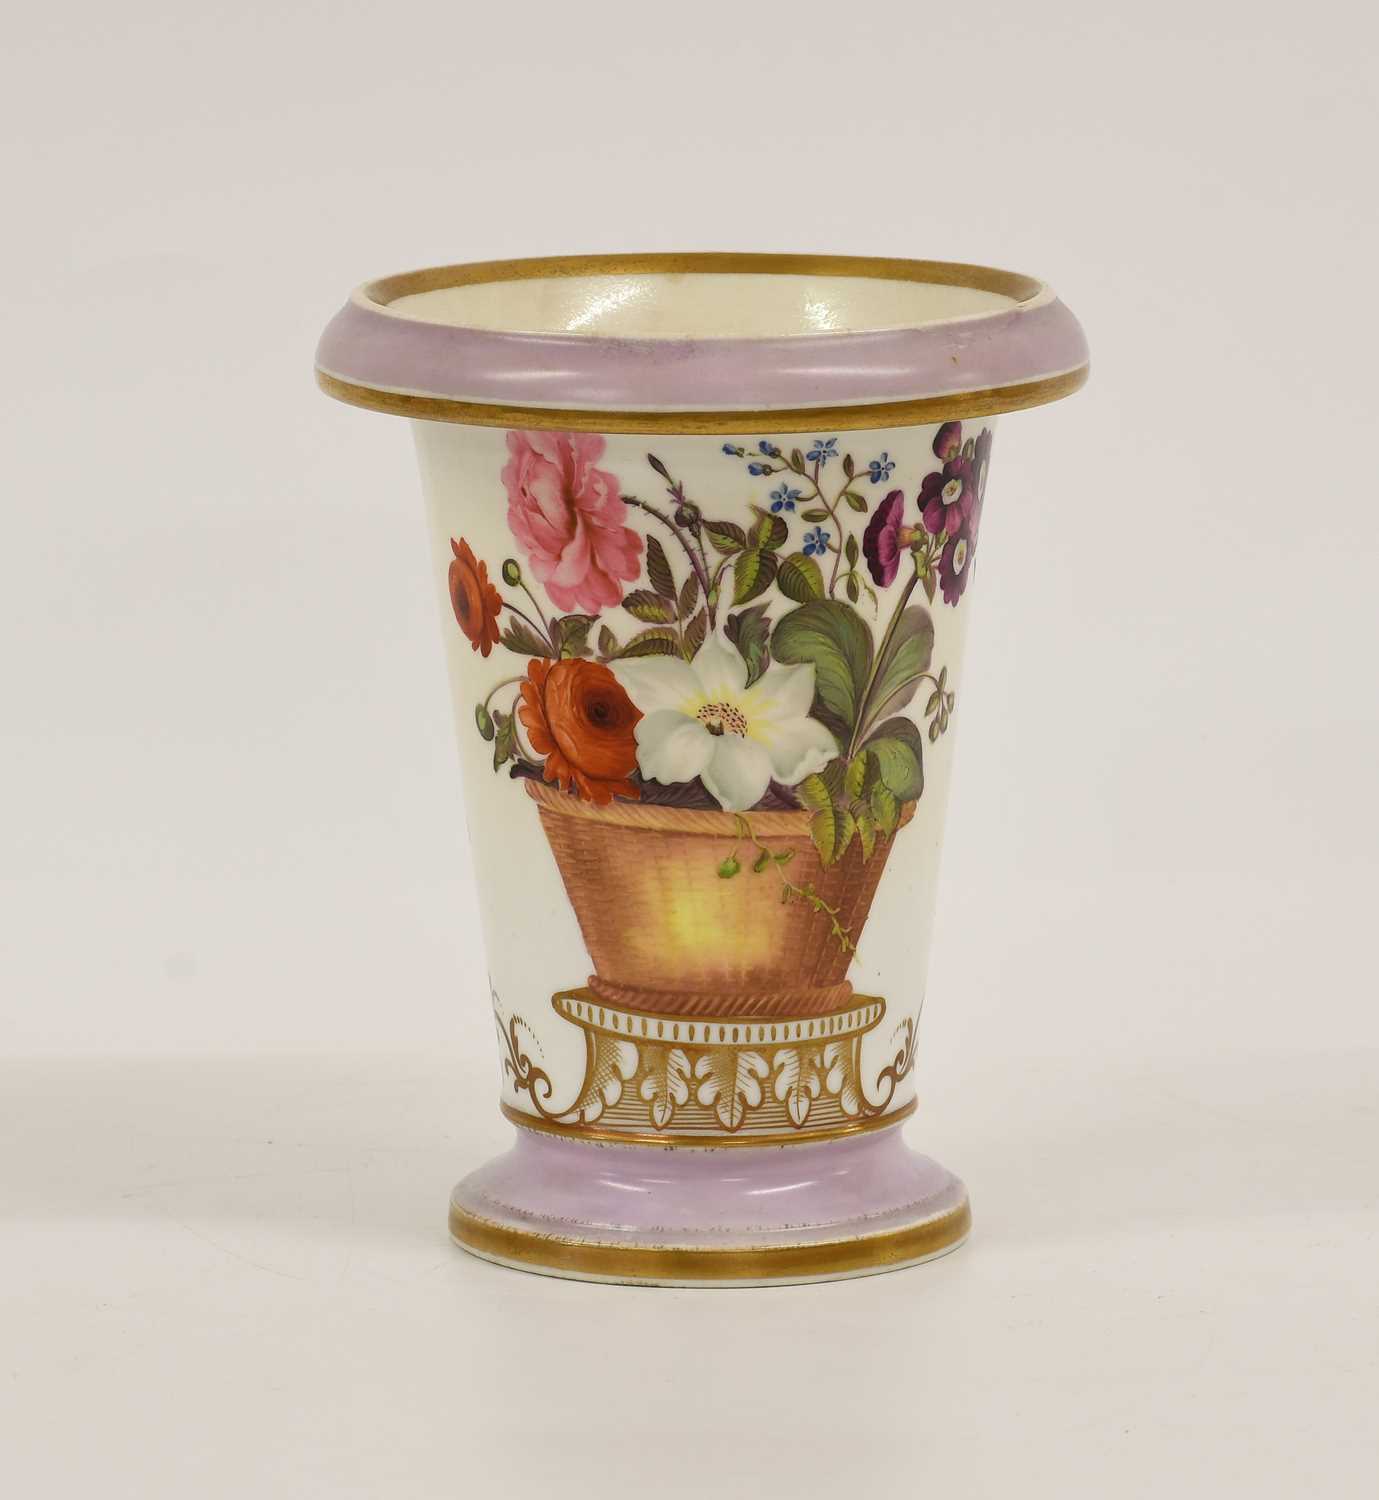 A Swansea-Style Porcelain Spill Vase, circa 1815, of flared form with everted rim, painted with - Image 2 of 2